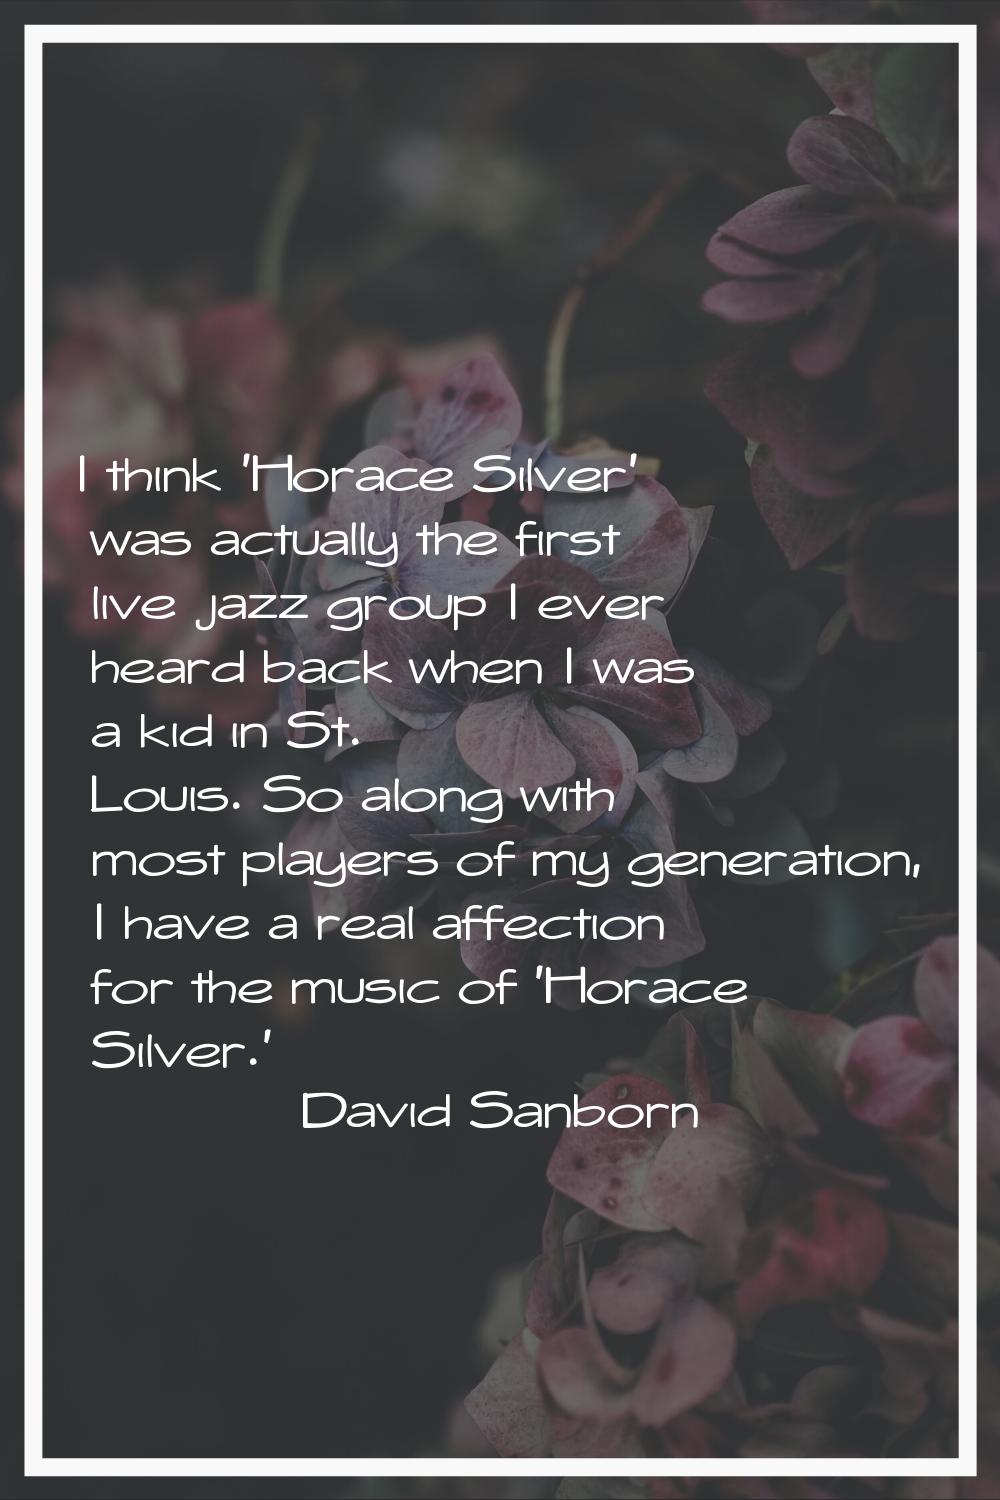 I think 'Horace Silver' was actually the first live jazz group I ever heard back when I was a kid i